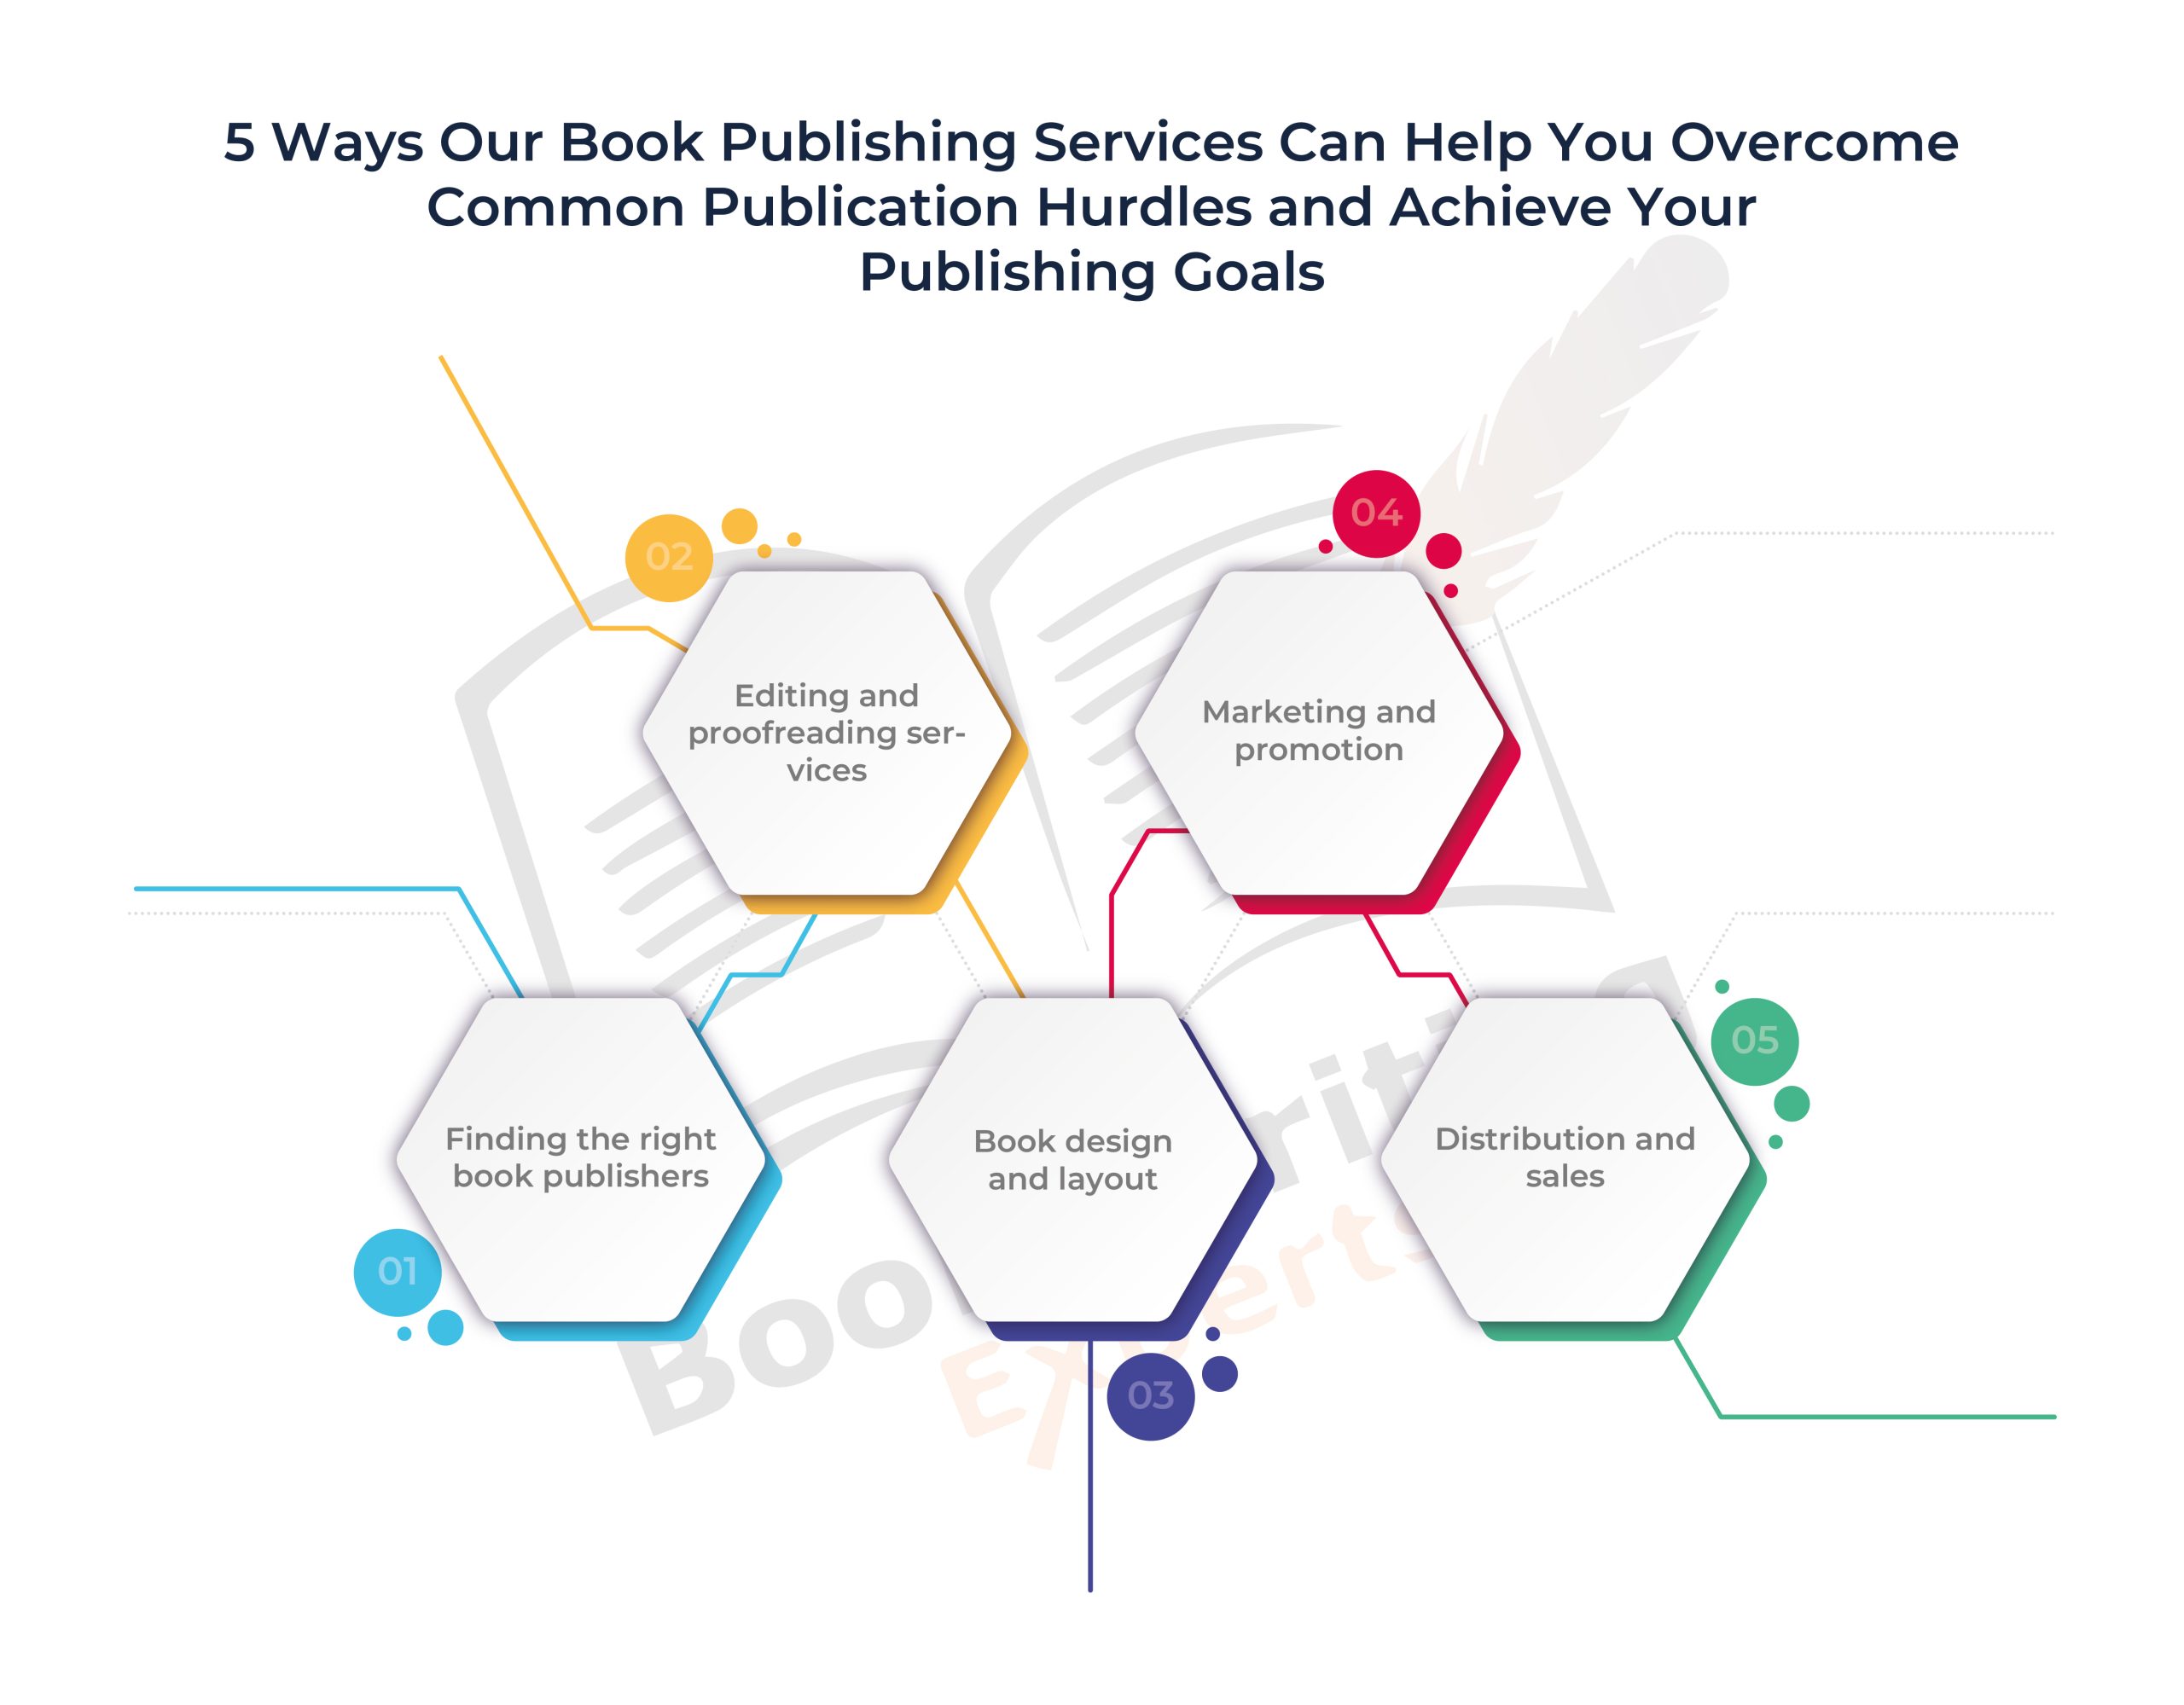 https://wp23.cryscampus.com/bwe/book-publishing-services/